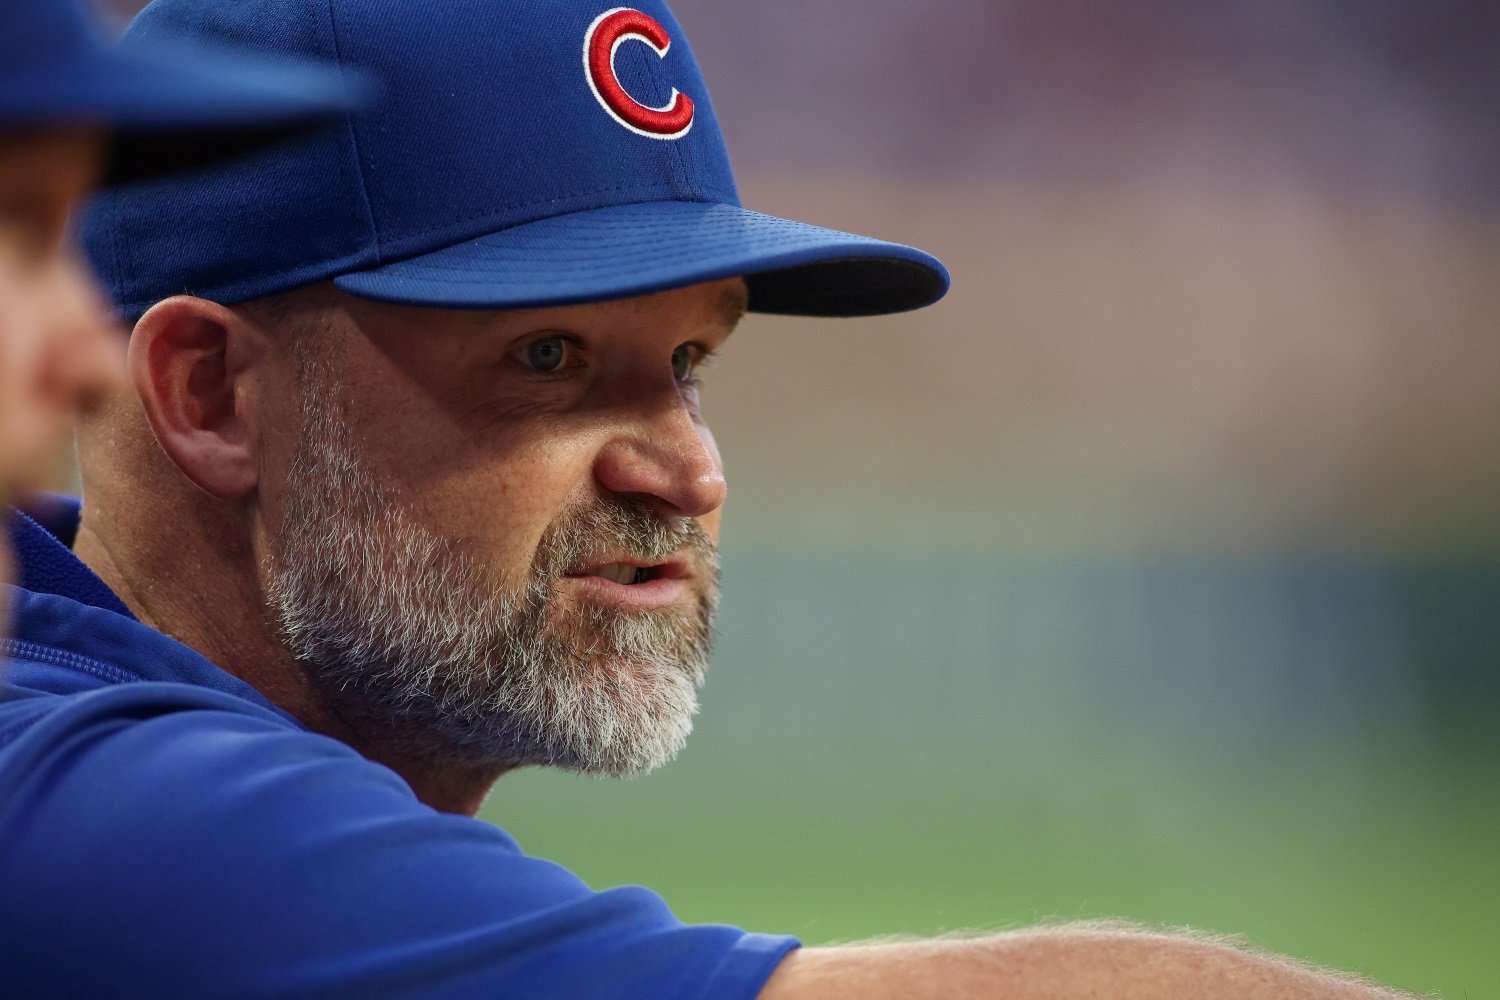 David Ross, Chicago Cubs hope to build on strong 2nd half